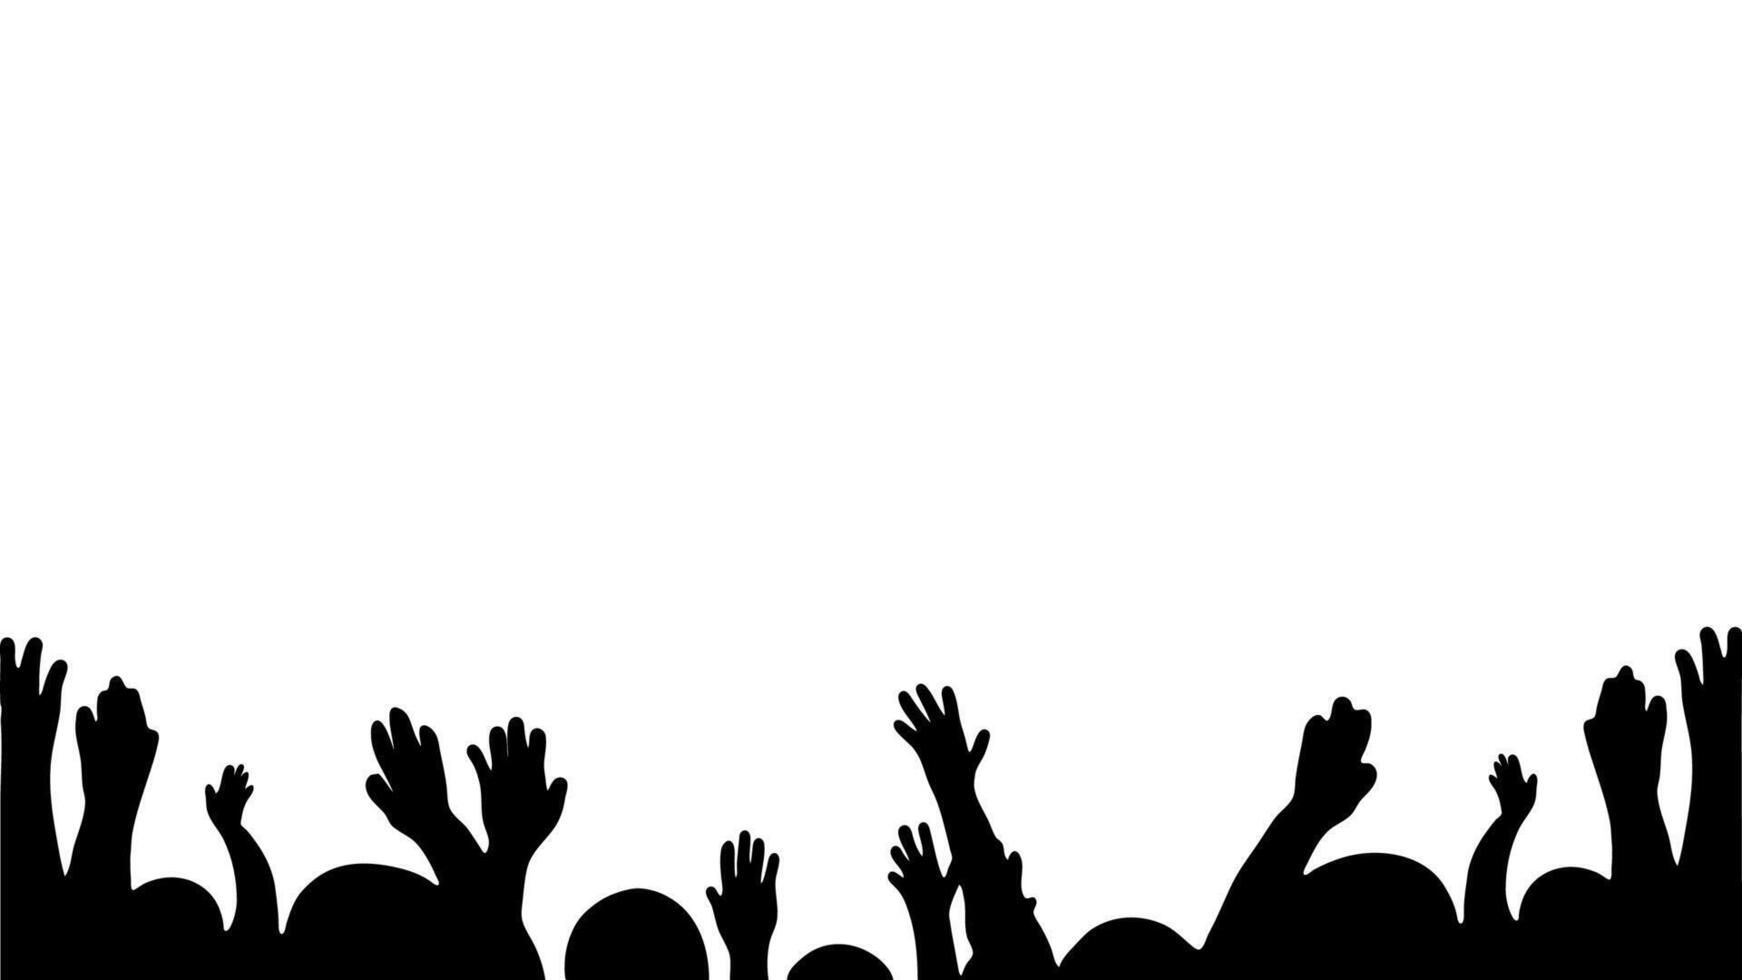 Illustration vector graphic of hand crowd silhouette with their hands up in the air